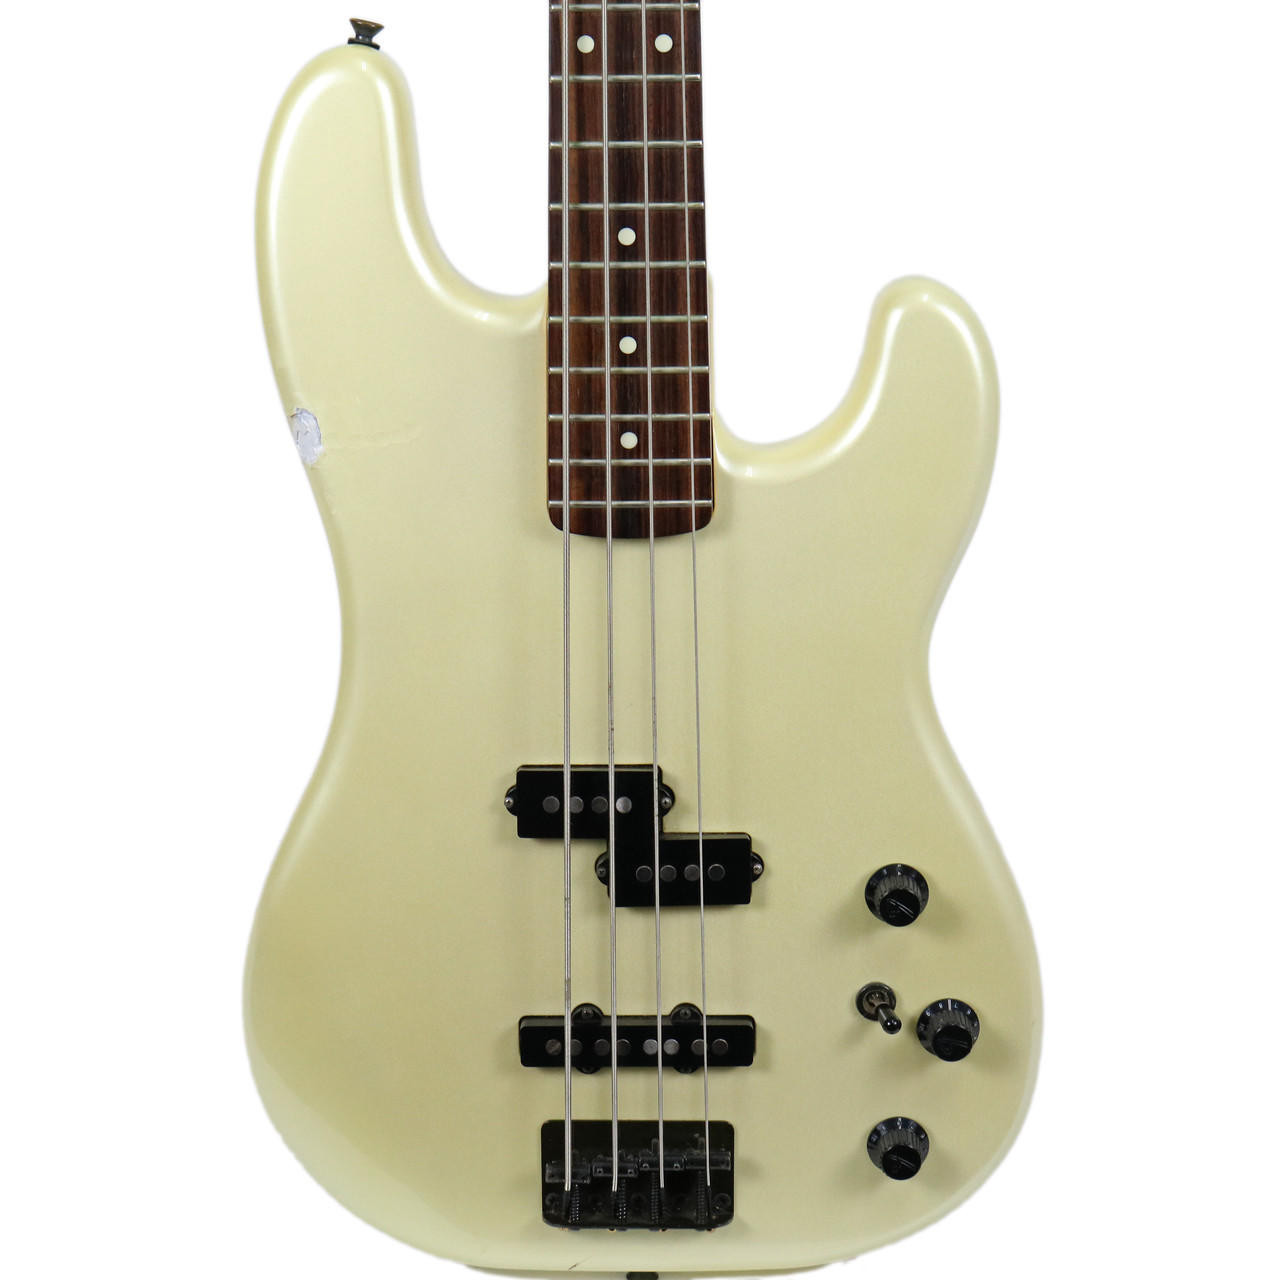 Vintage 1984 Fender Jazz Bass Special White Pearl Finish